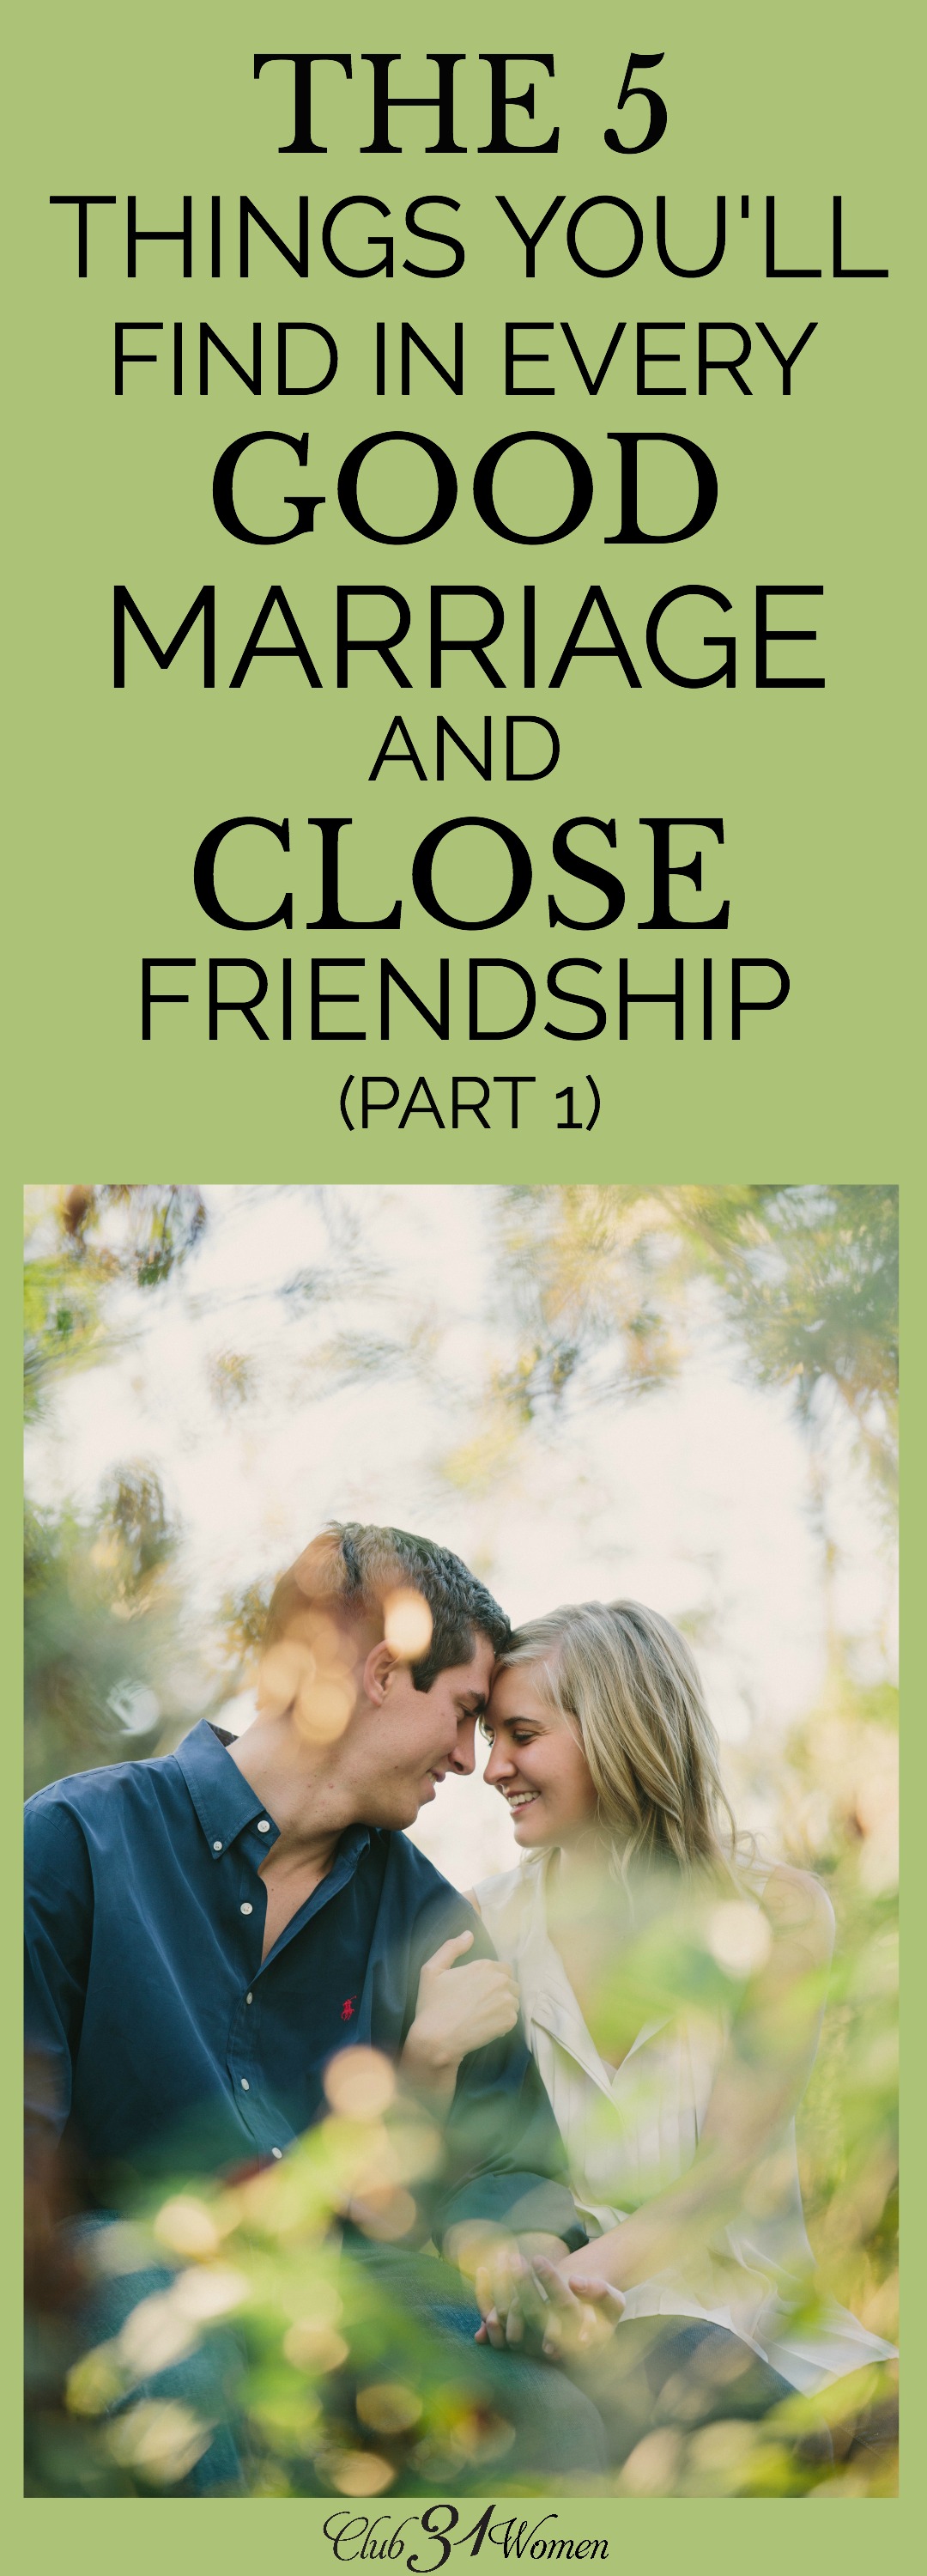 What are the key elements that make up a good marriage? They aren't much different from what makes a close friendship. Here are 5 things you'll find! via @Club31Women